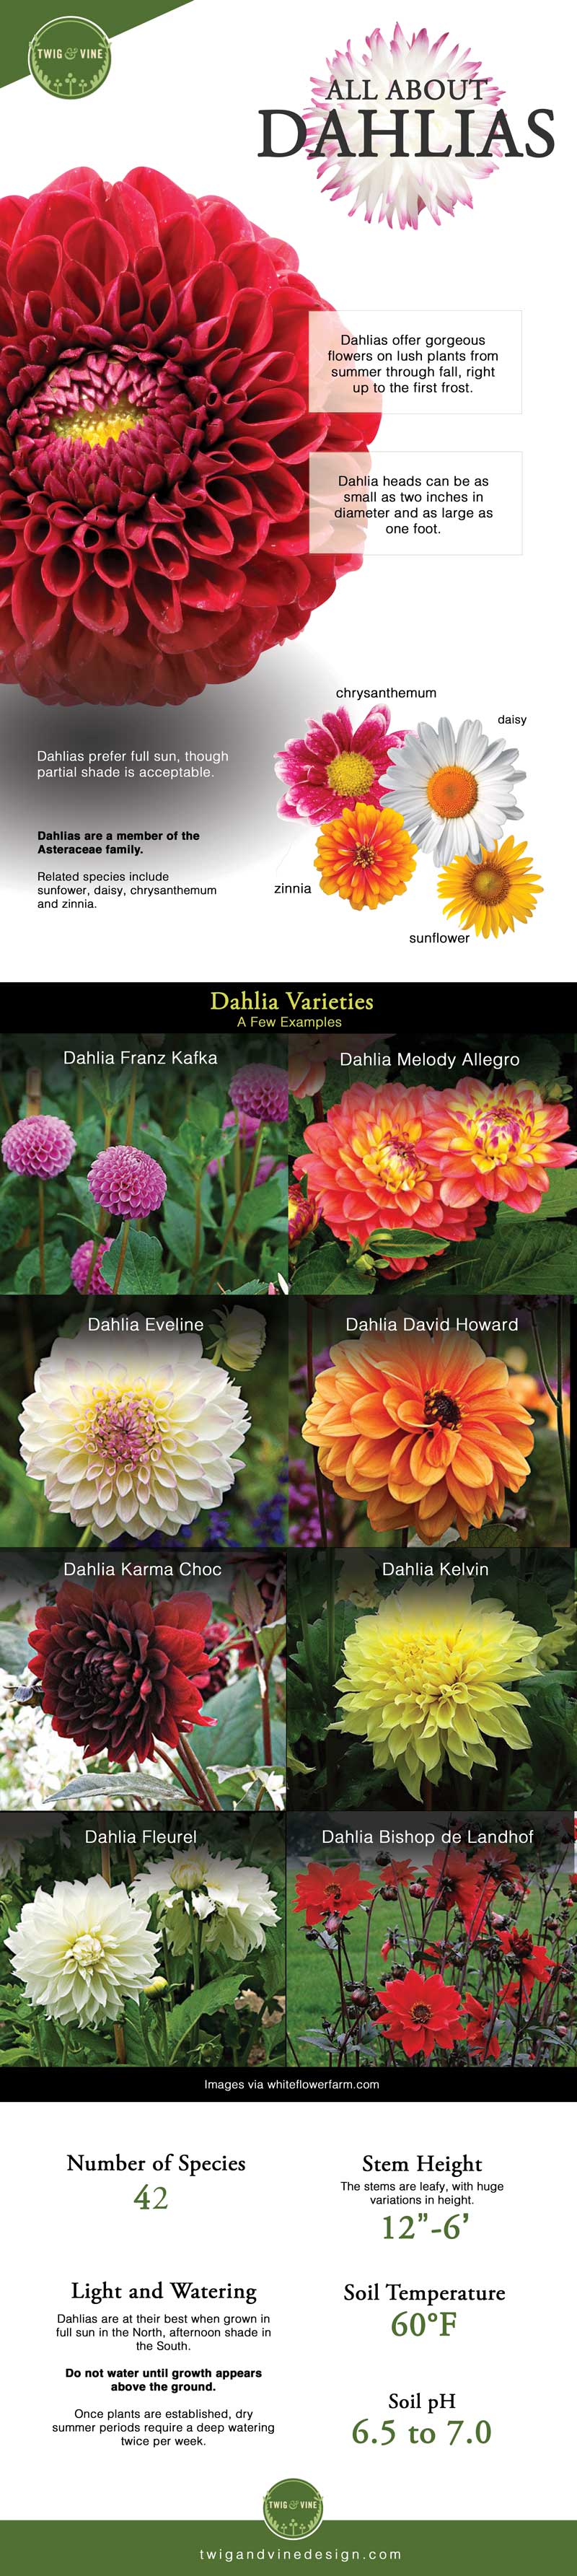 All About Dahlias [Infographic]